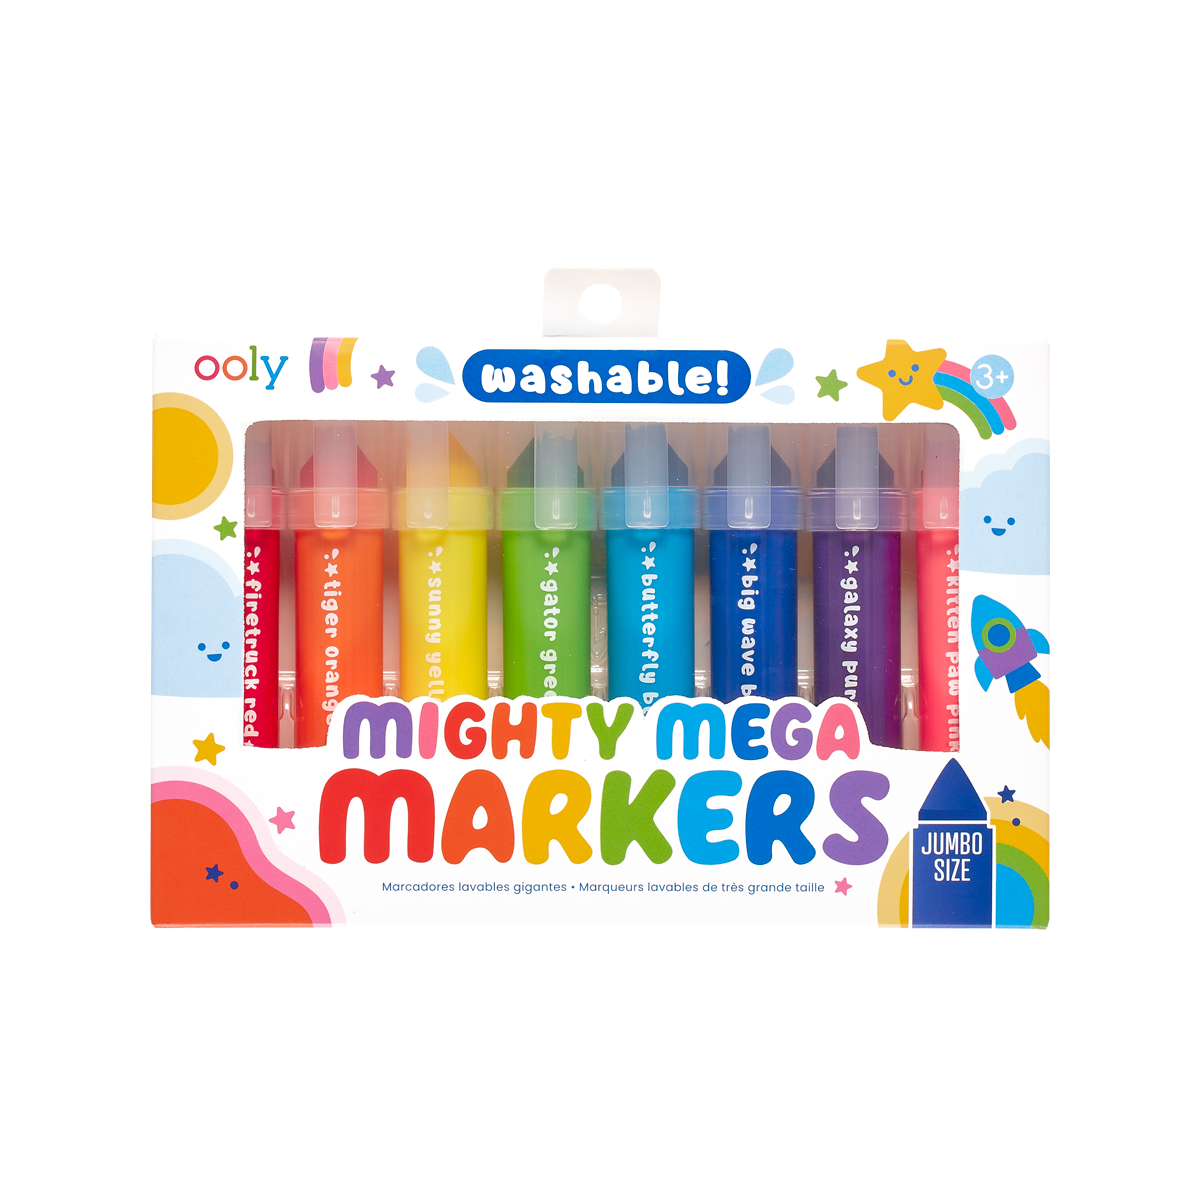 OOLY Mighty Mega Markers set of 8 in packaging